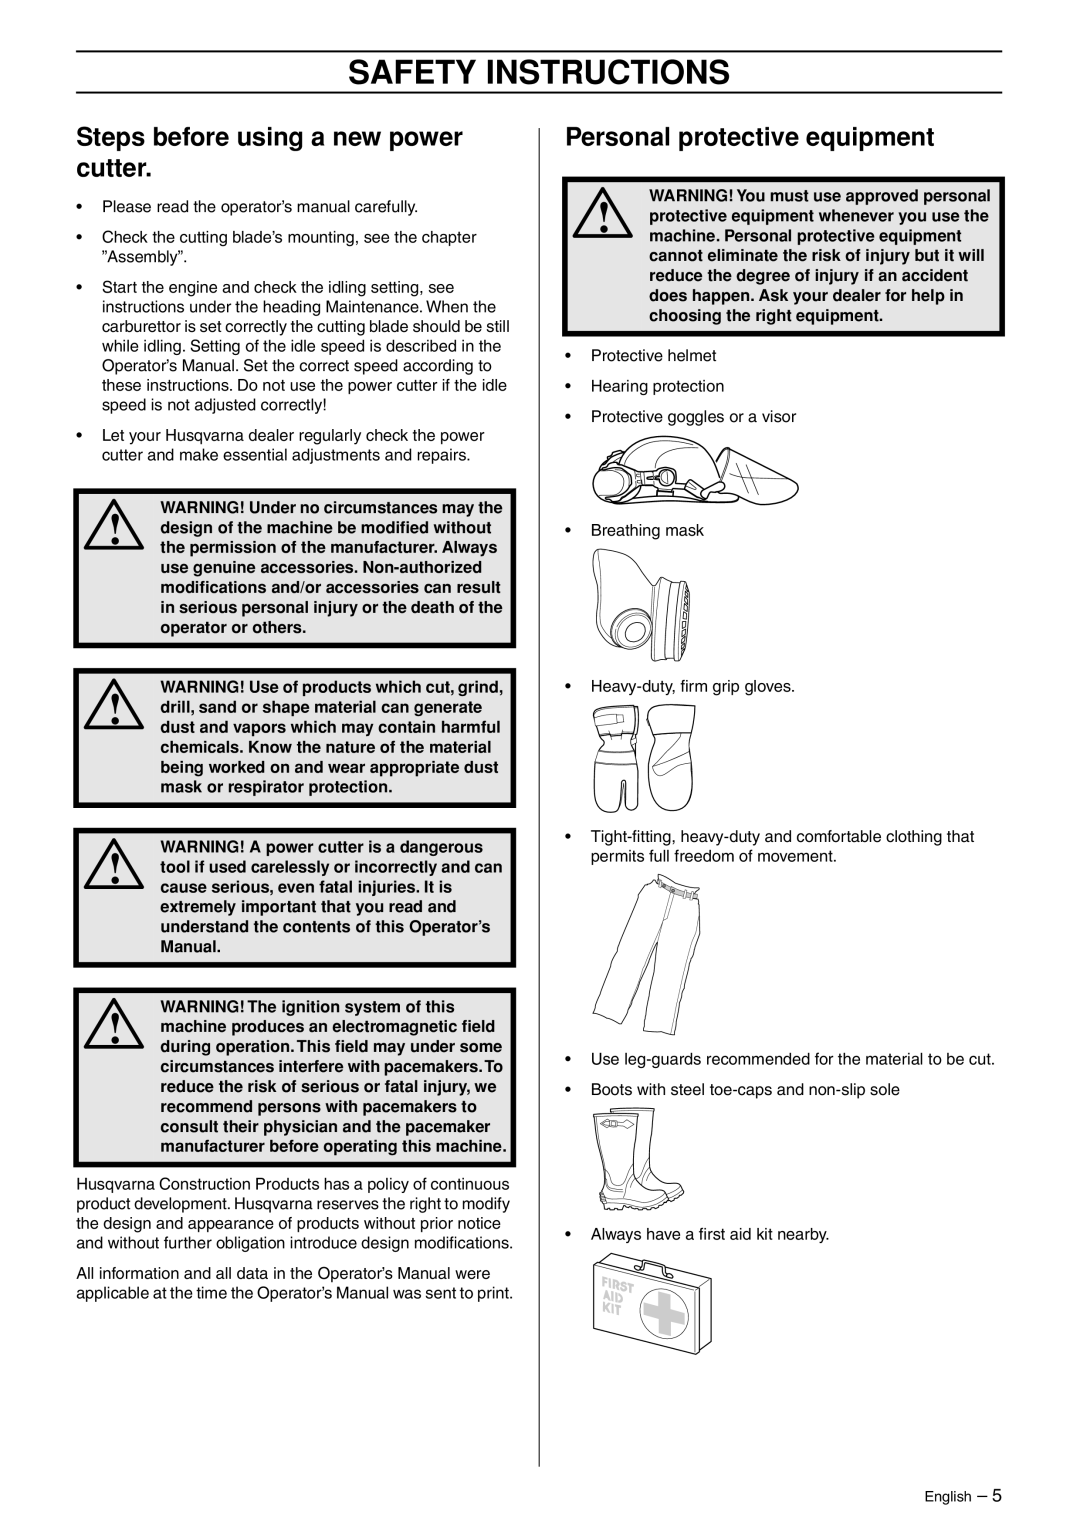 Husqvarna K750 manual Safety Instructions, Steps before using a new power cutter, Personal protective equipment 